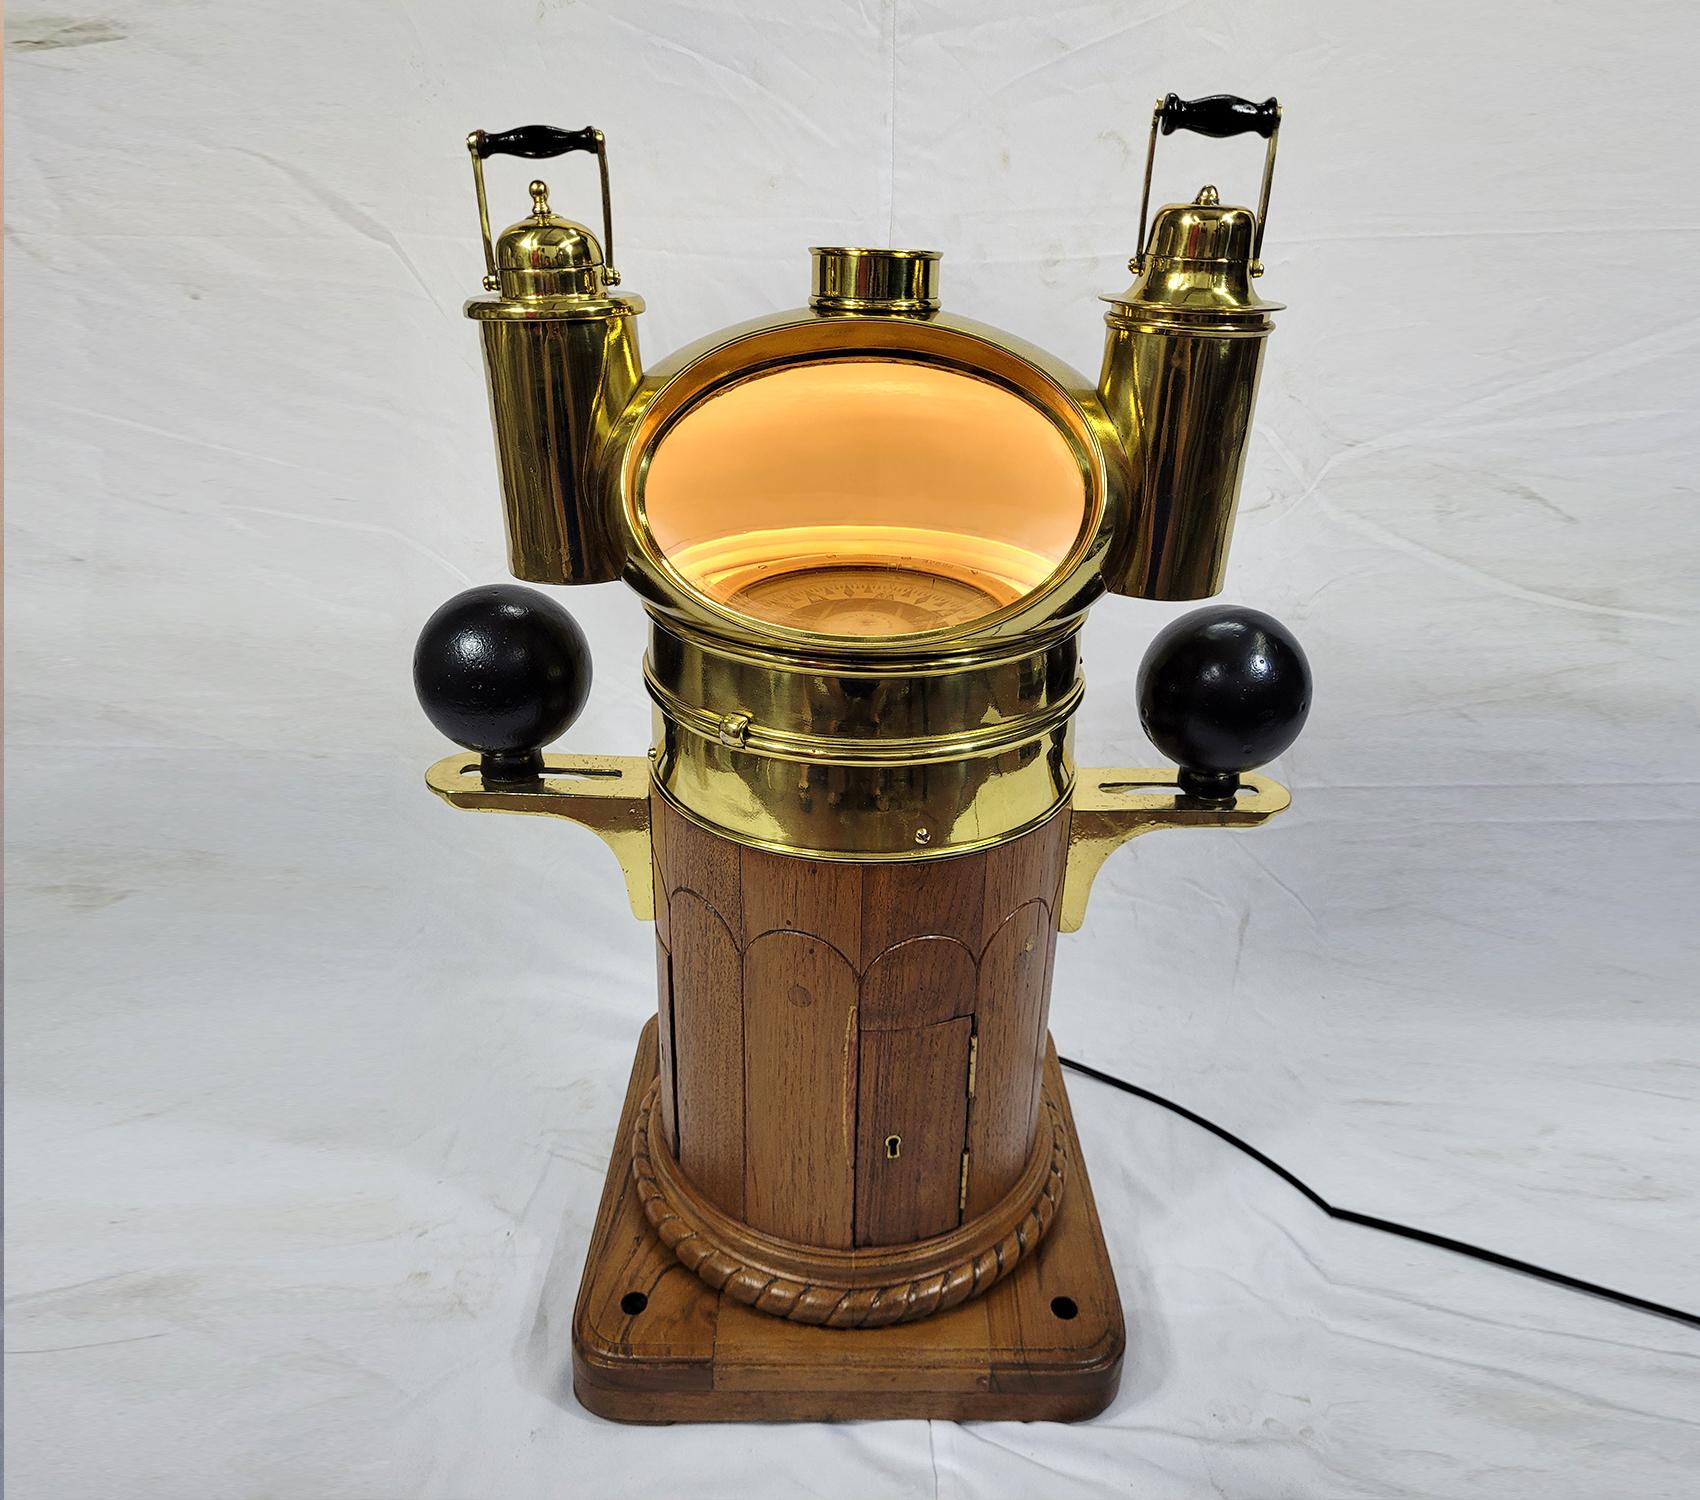 Absolutely awesome yacht binnacle by New York maker T.S & J.D Negus of New York. Varnished base with intricate rope carving. The brass binnacle carries 2 oil lanterns, Iron compensating balls are mounted to brass brackets. This is a fabulous